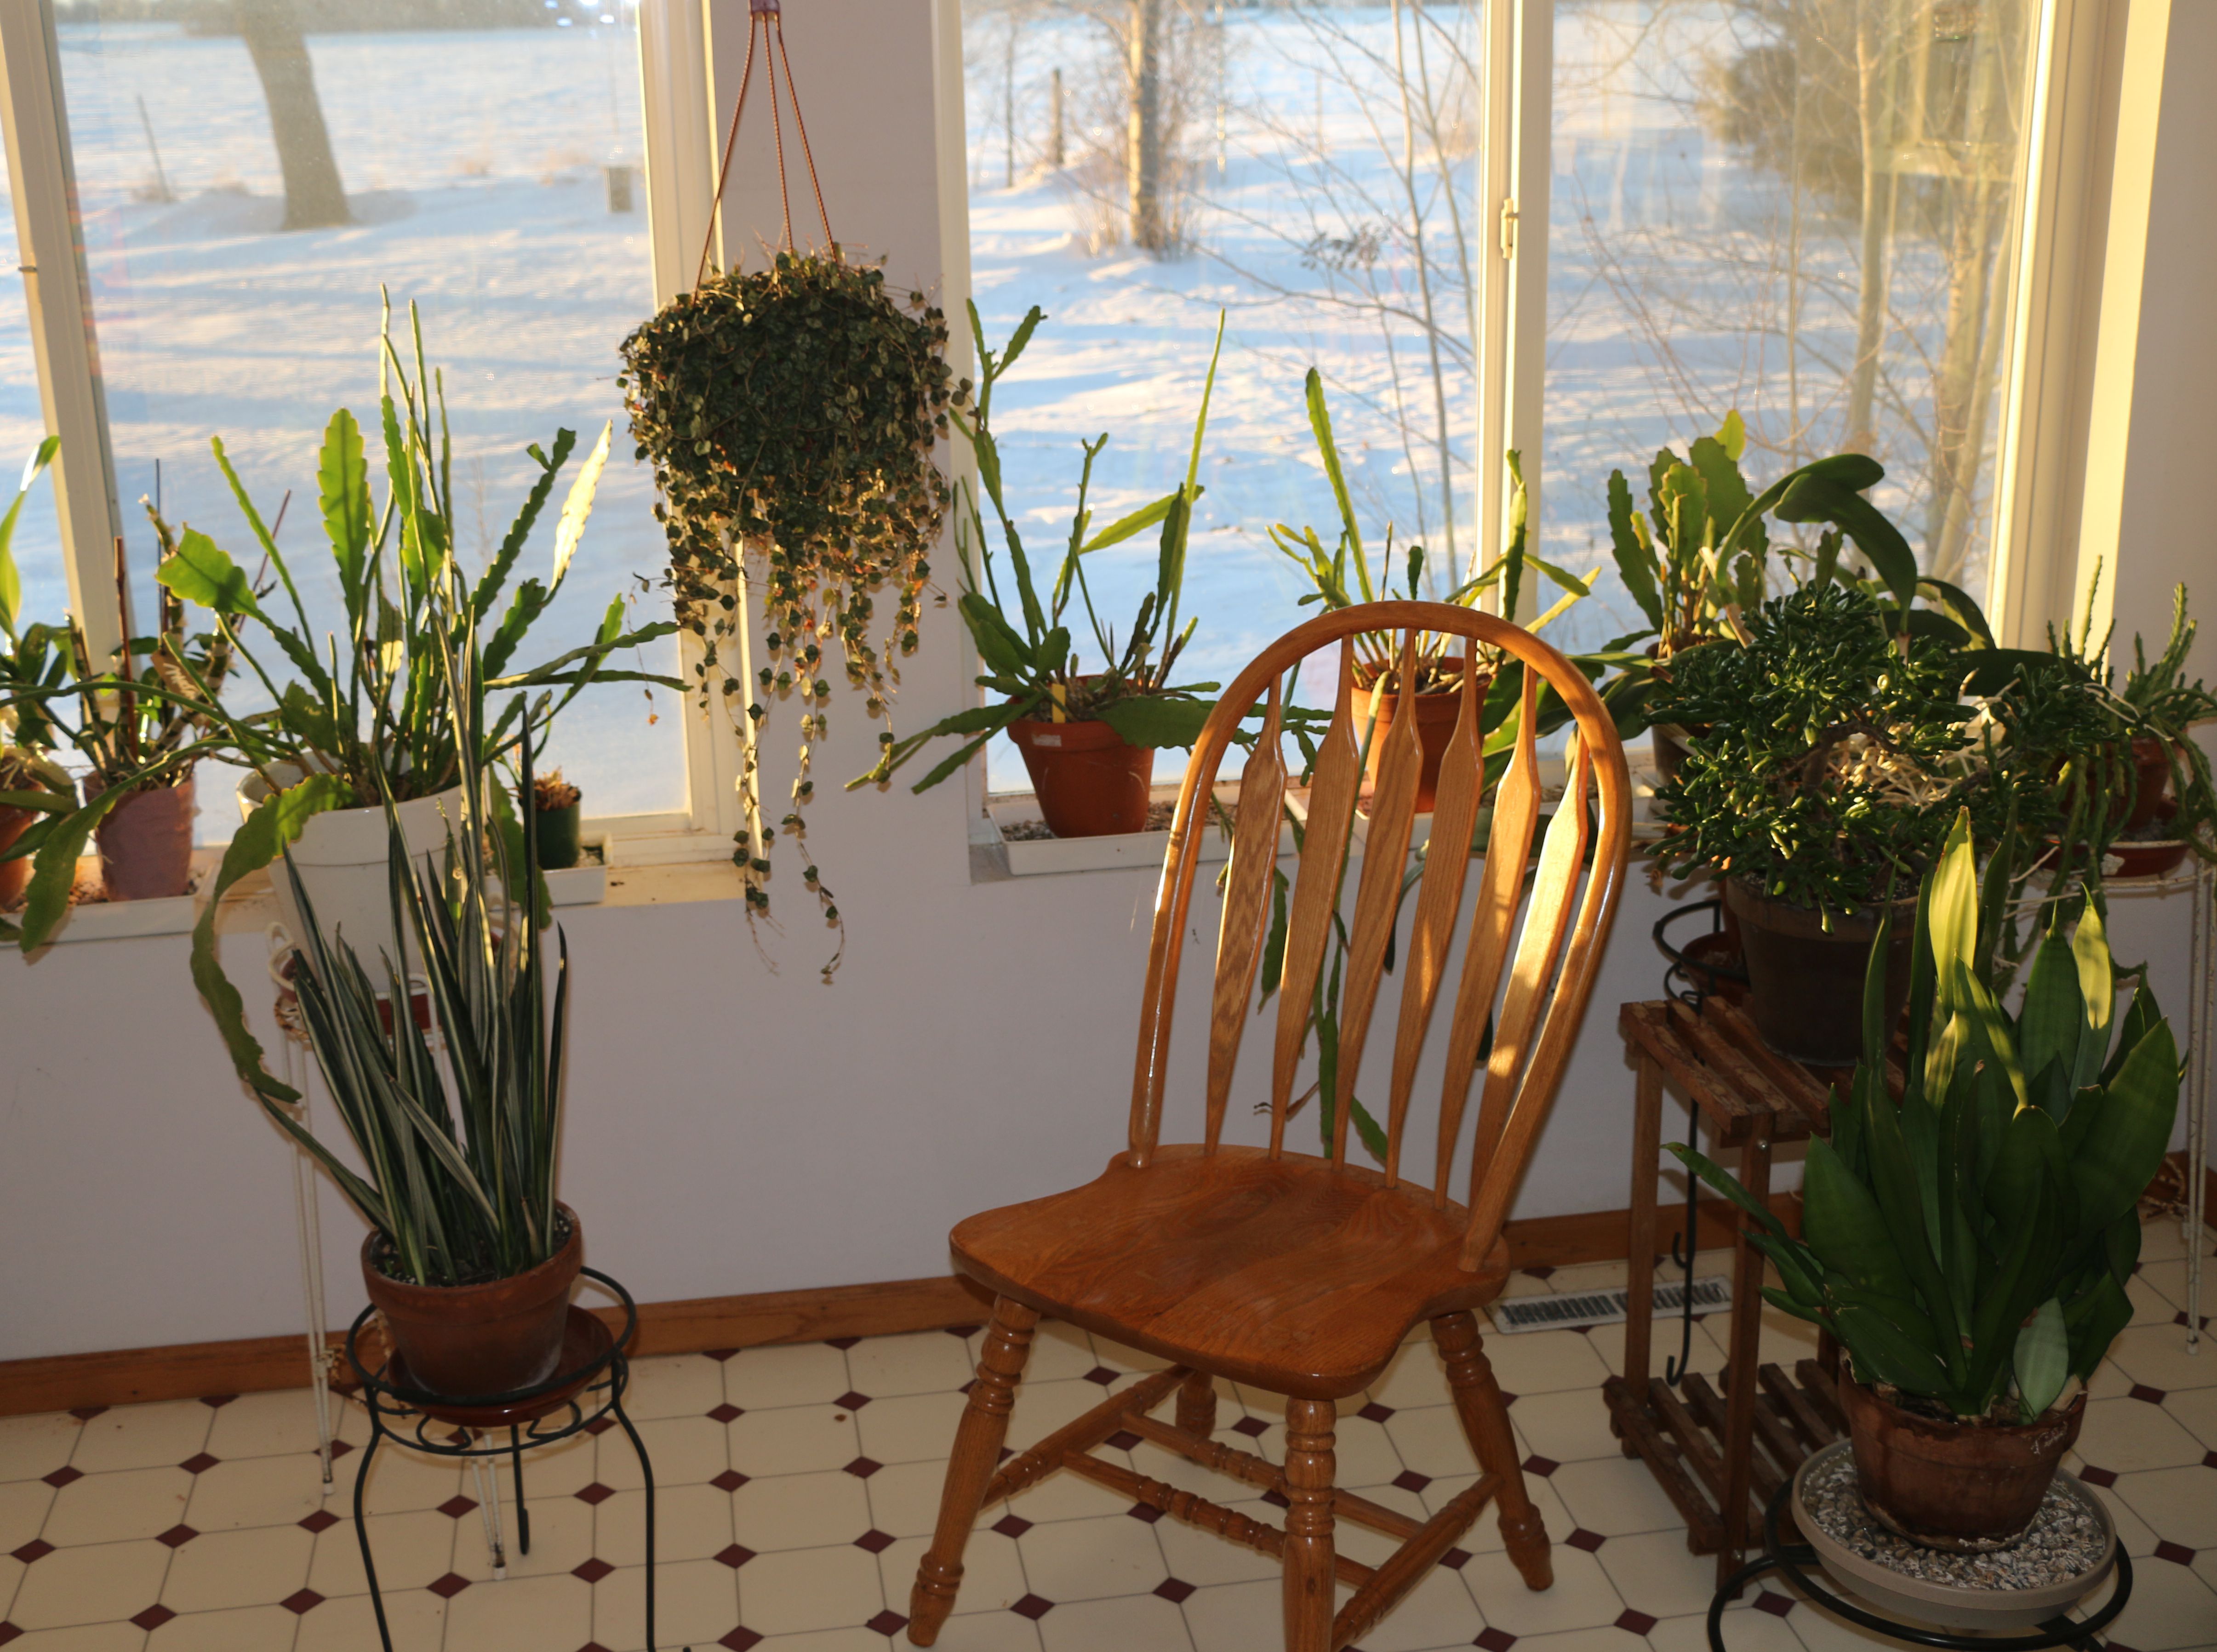 green plants next to a chair next to a window